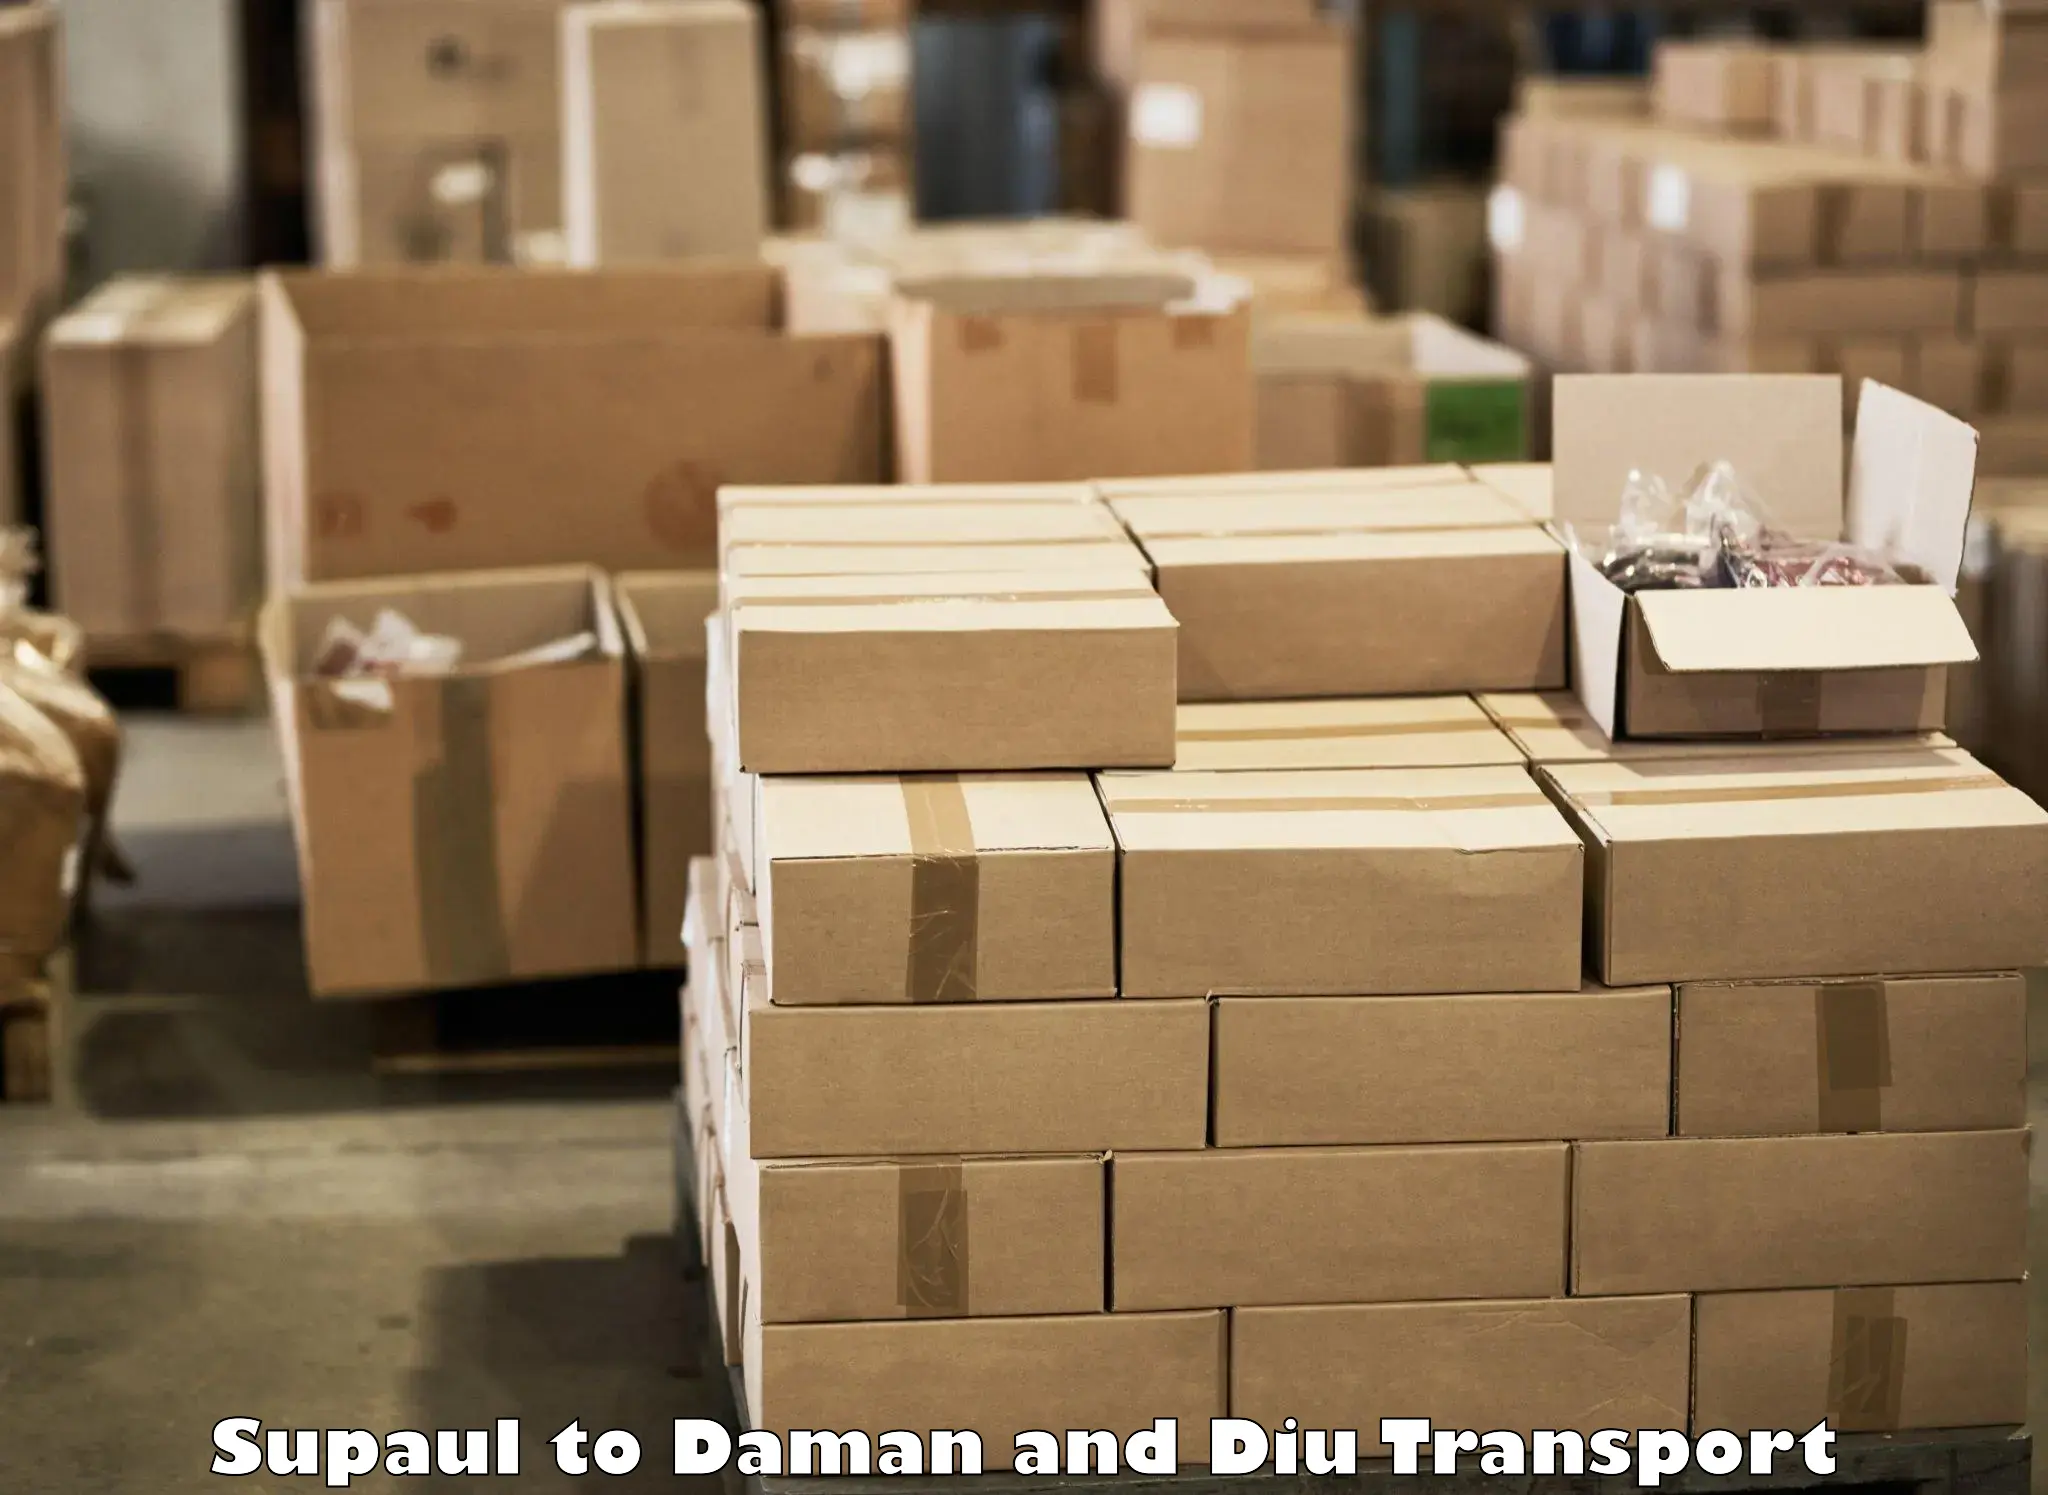 Vehicle transport services Supaul to Daman and Diu